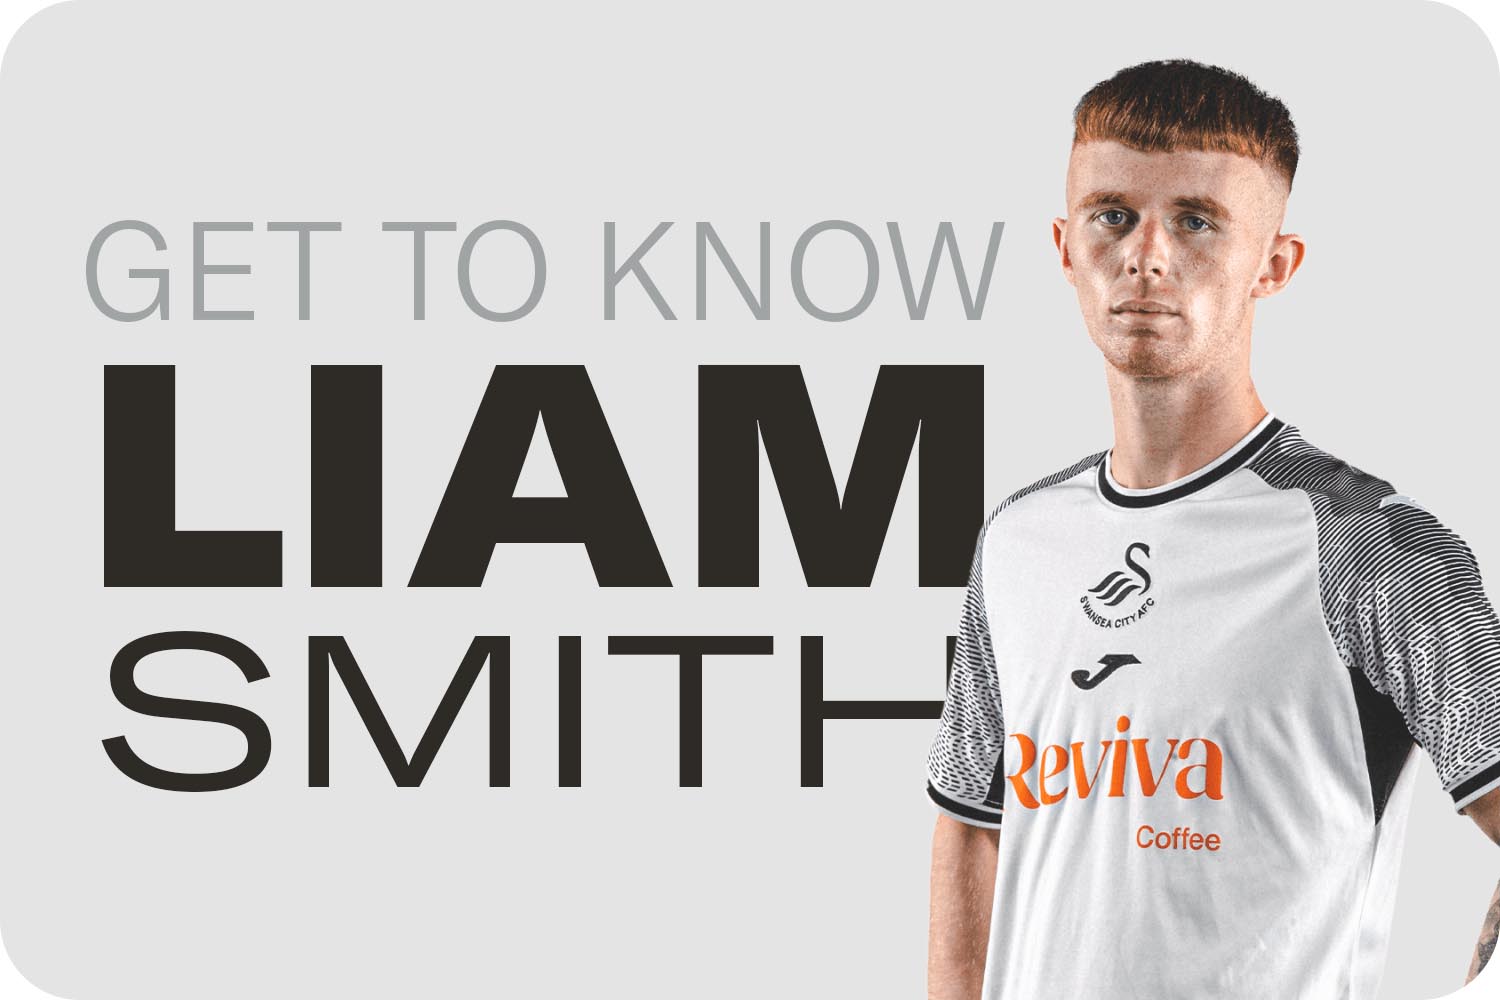 Get to Know Liam Smith